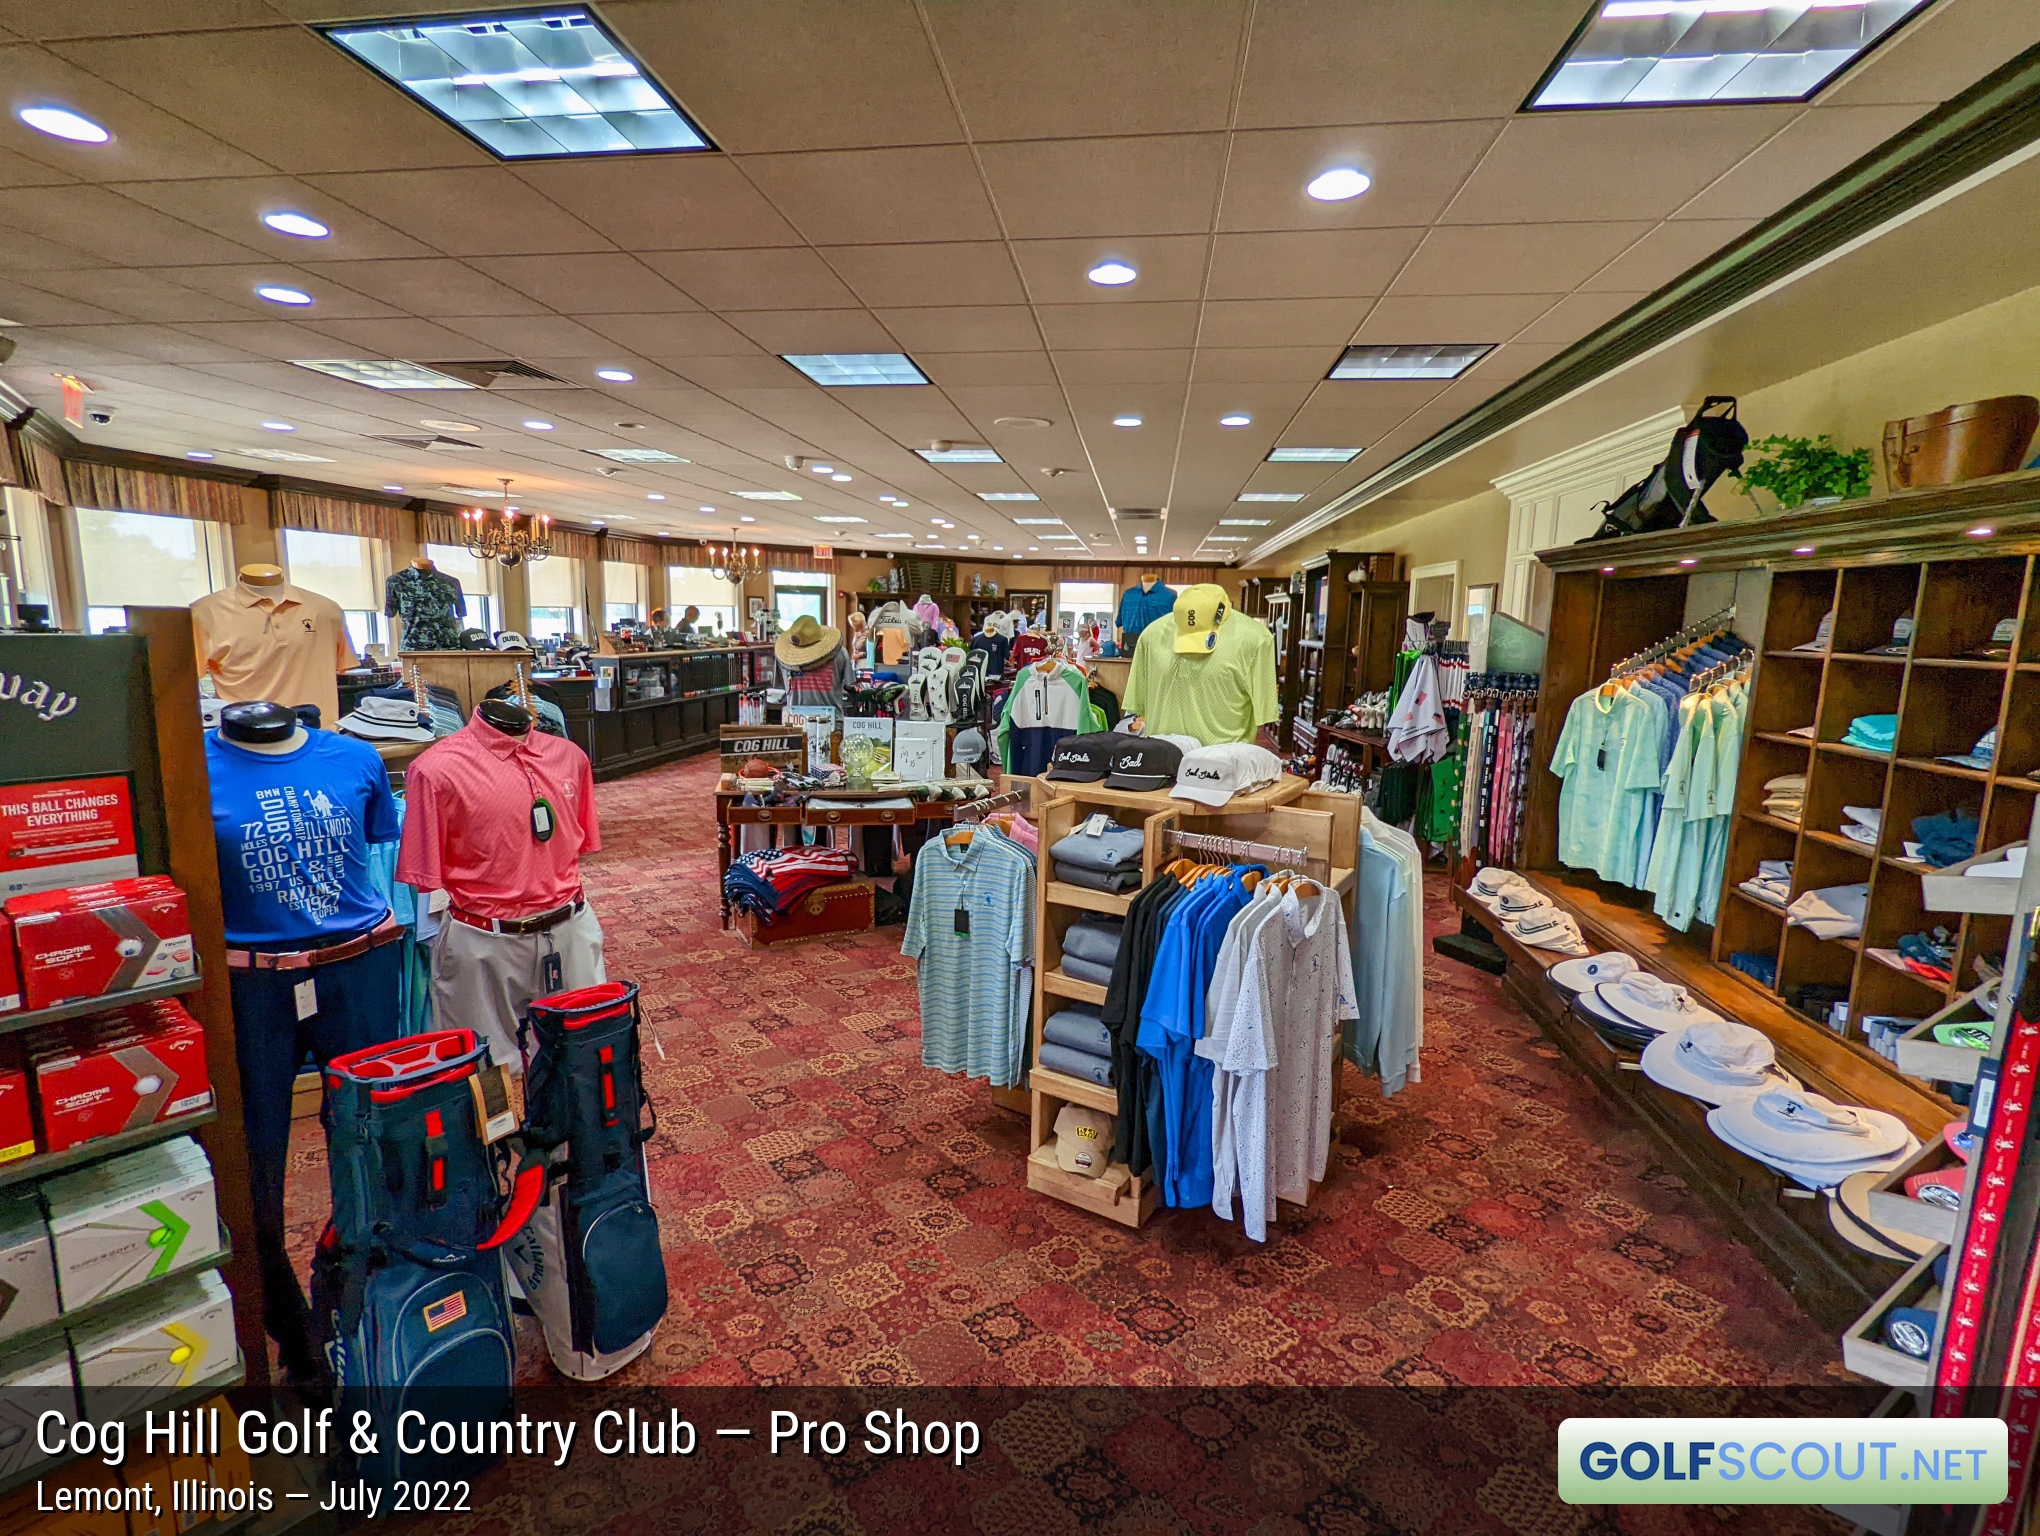 Photo of the pro shop at Cog Hill Course #2 - Ravines in Lemont, Illinois. The pro shop in the building dedicated to courses 2 and 4. Absolutely packed full of golf merch.